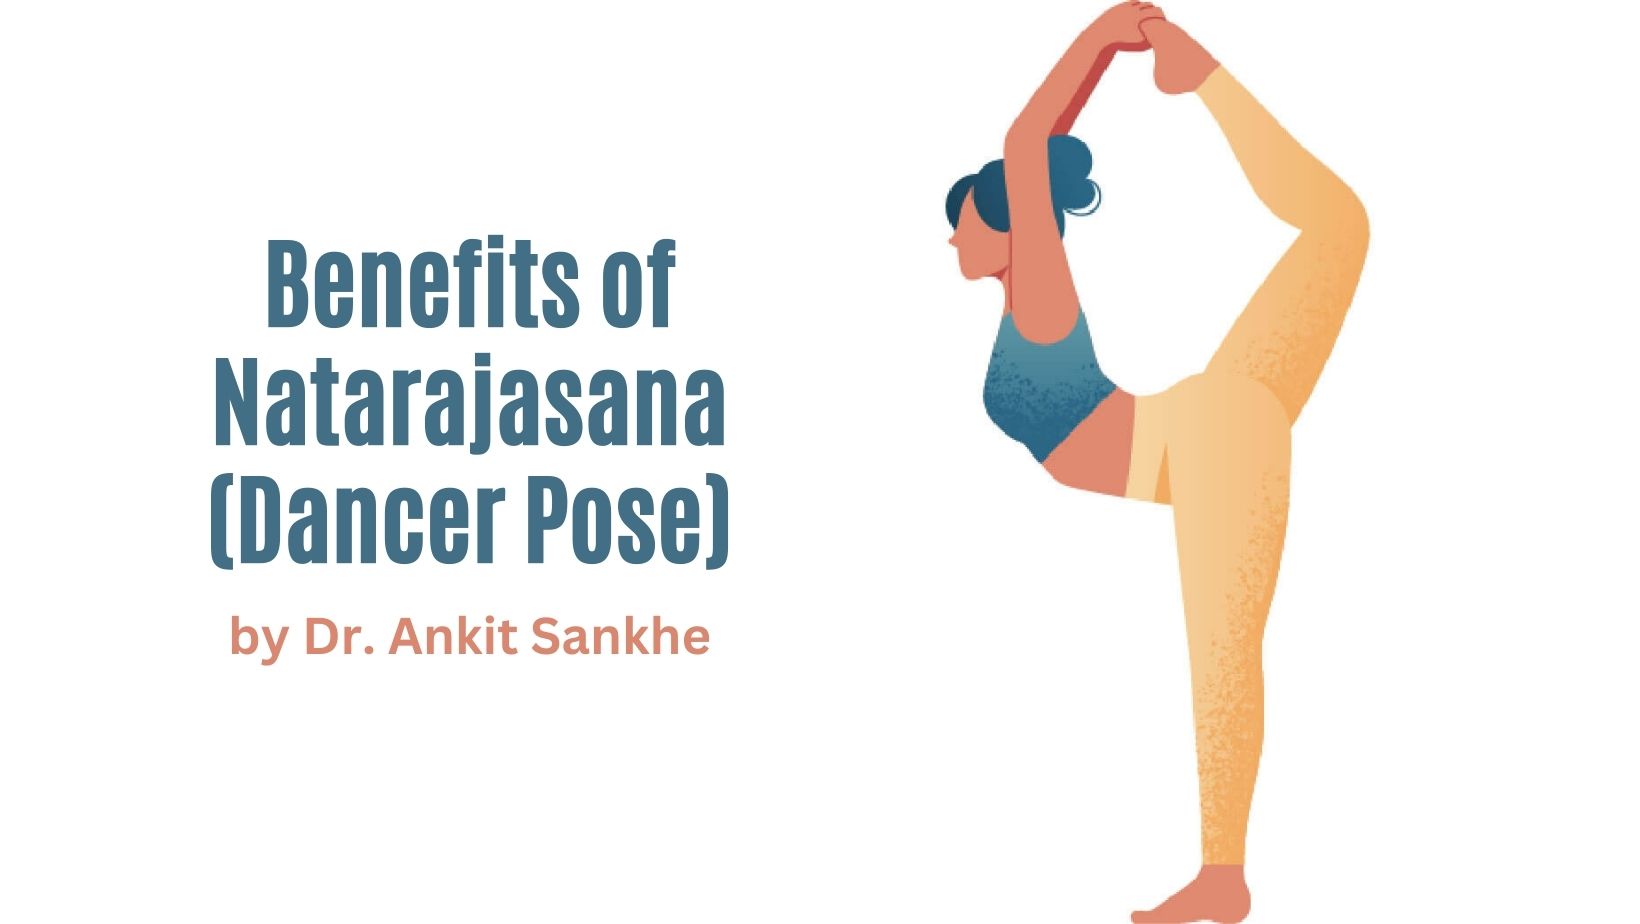 Step by step guide for dandayamana dhanurasana or standing bow pulling pose  | TheHealthSite.com